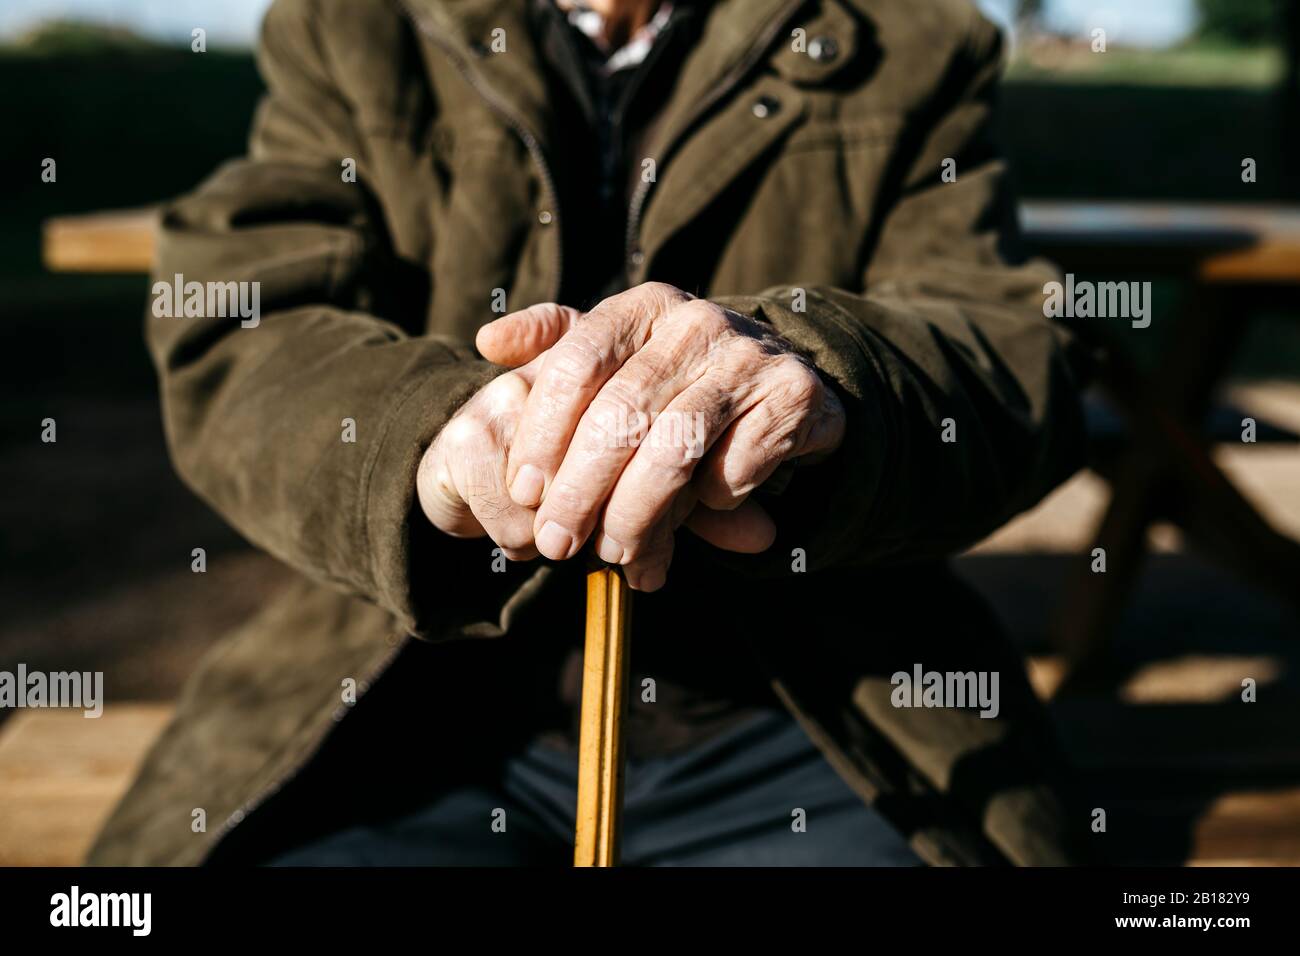 Old man's hands resting on his cane, close up Stock Photo